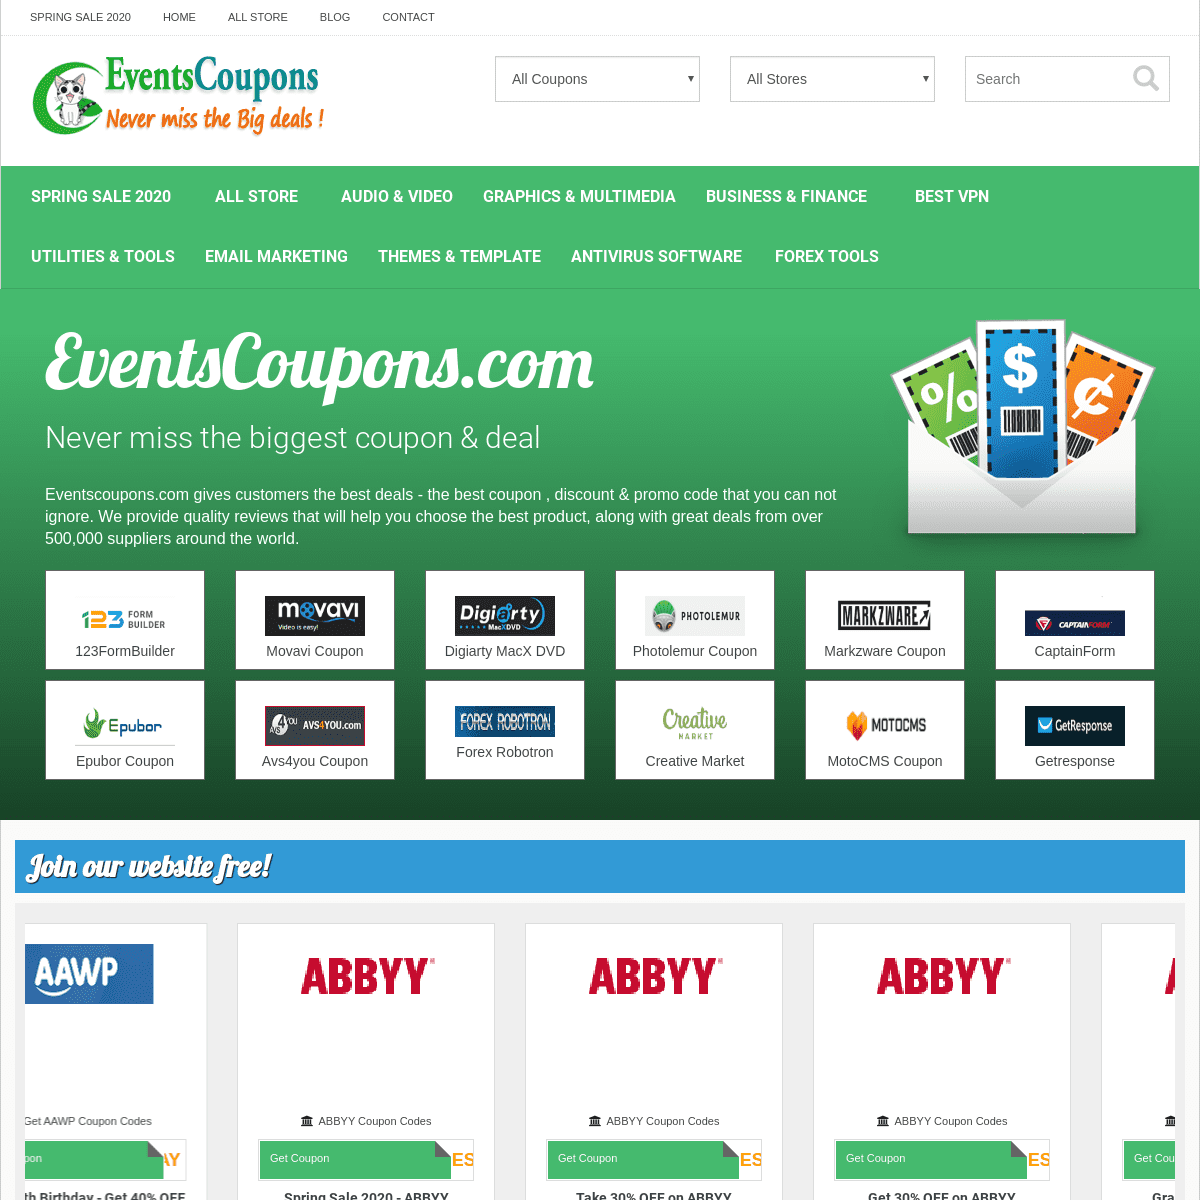 A complete backup of eventscoupons.com